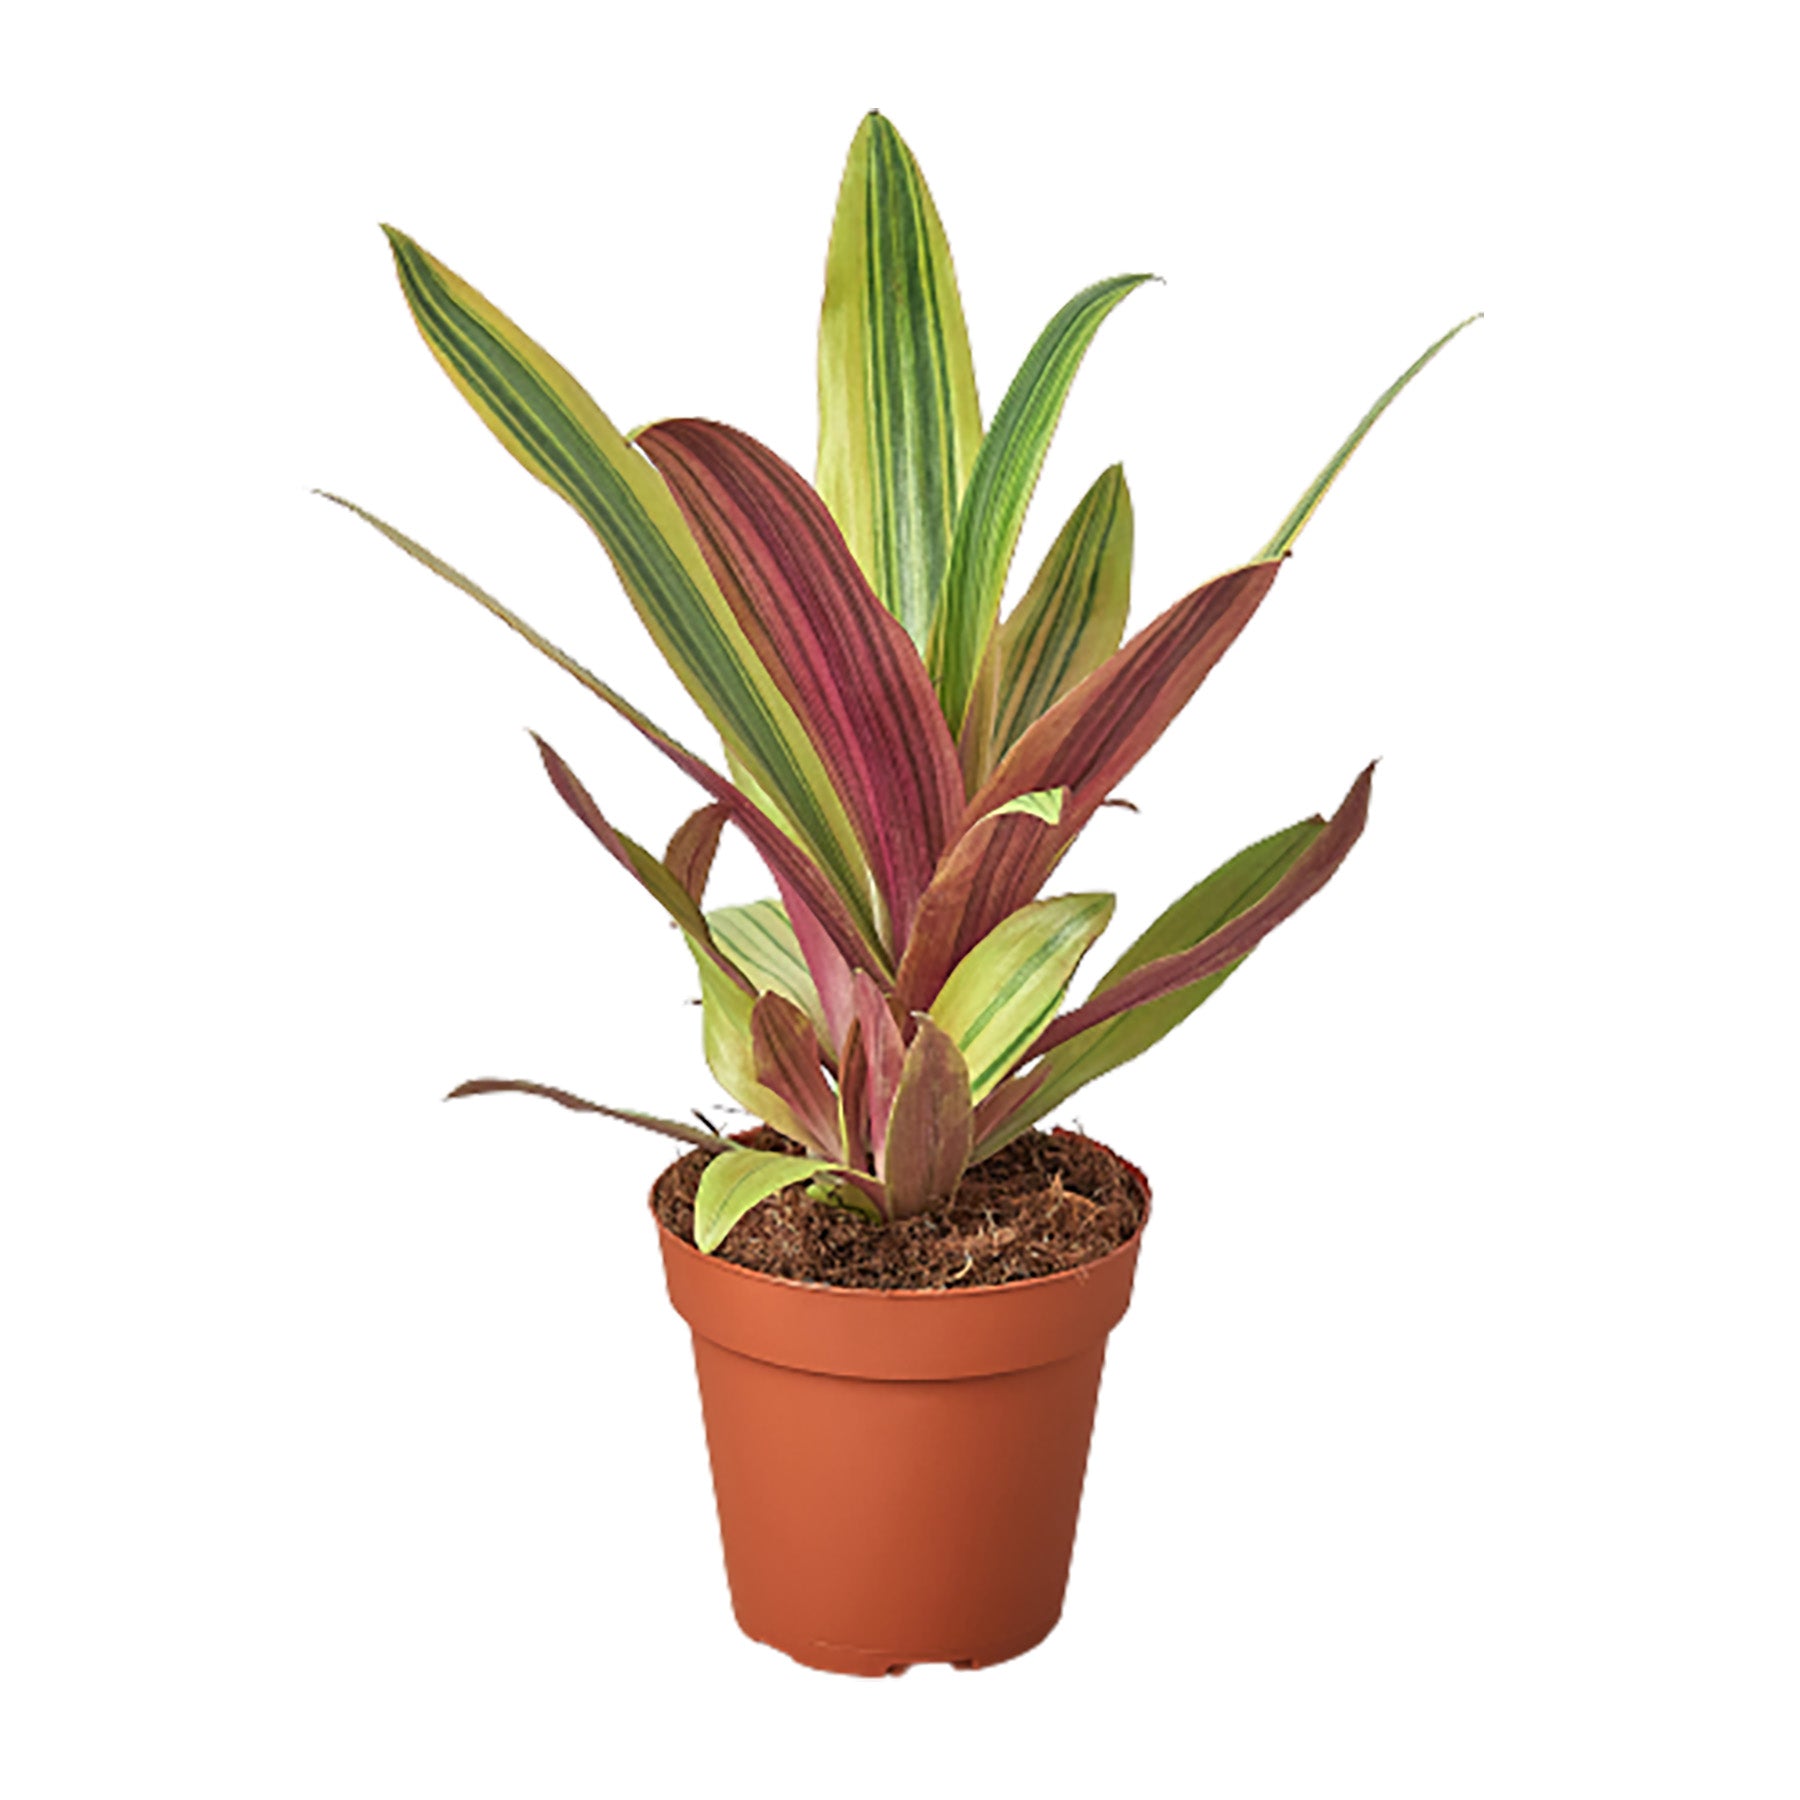 Find the best garden center near me for a stunning plant in a pot with vibrant red and green leaves.